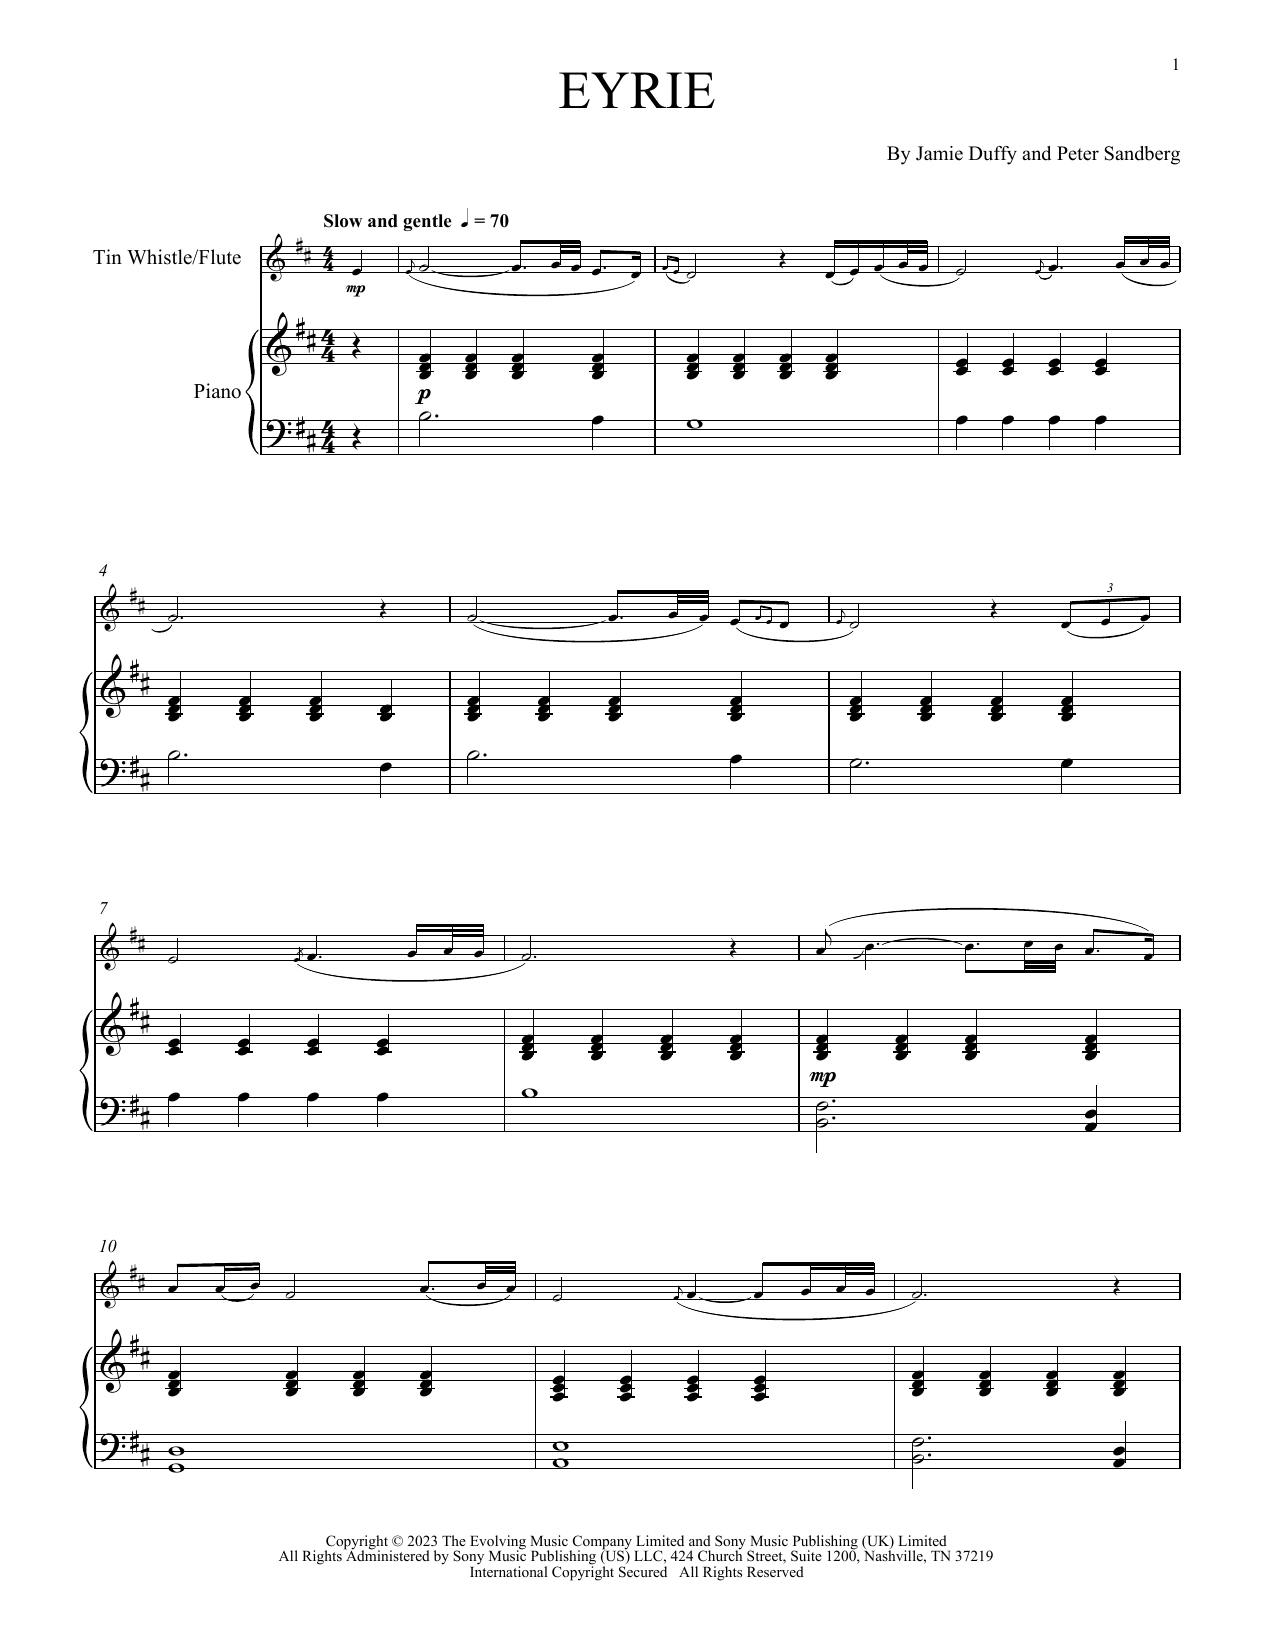 Jamie Duffy feat. Peter Sandberg Eyrie (for Tin Whistle and Piano) sheet music notes printable PDF score